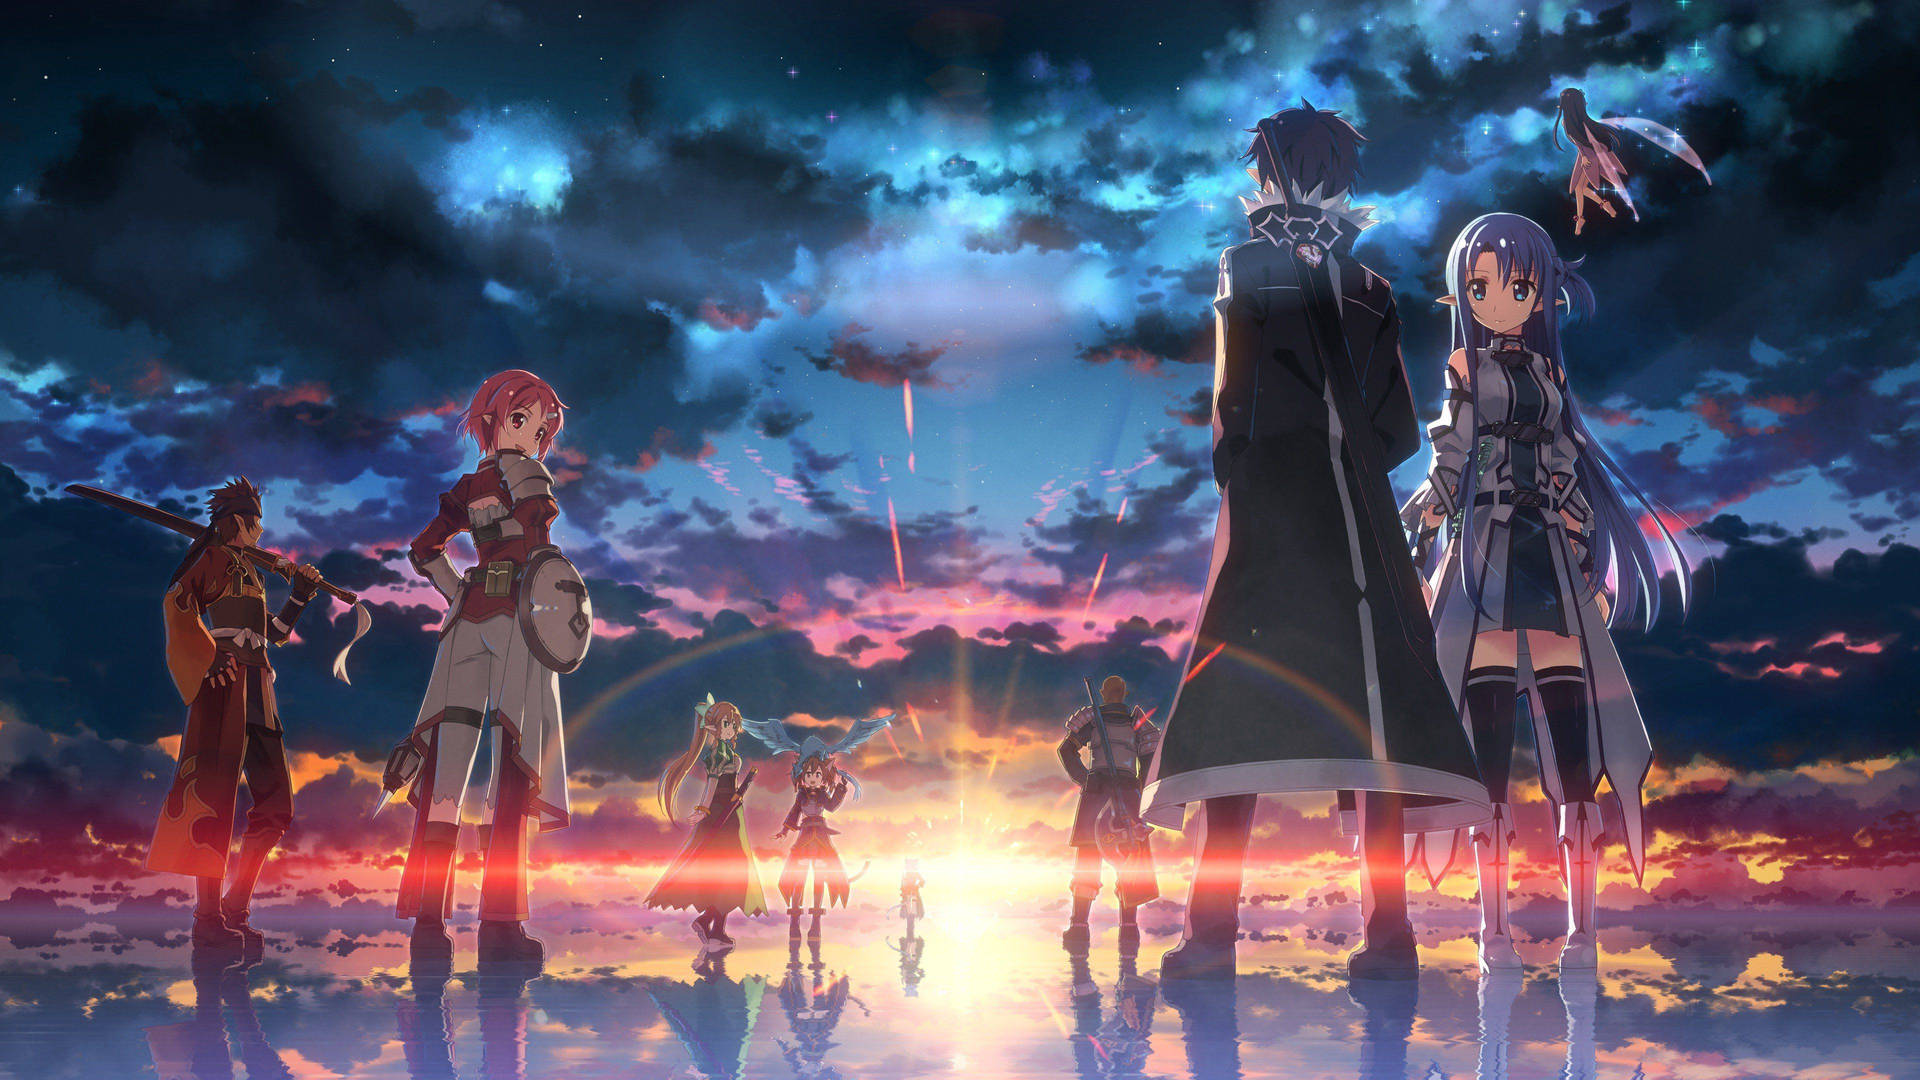 Defeat Your Enemies with Style - Become the Hero in Sword Art Online Wallpaper